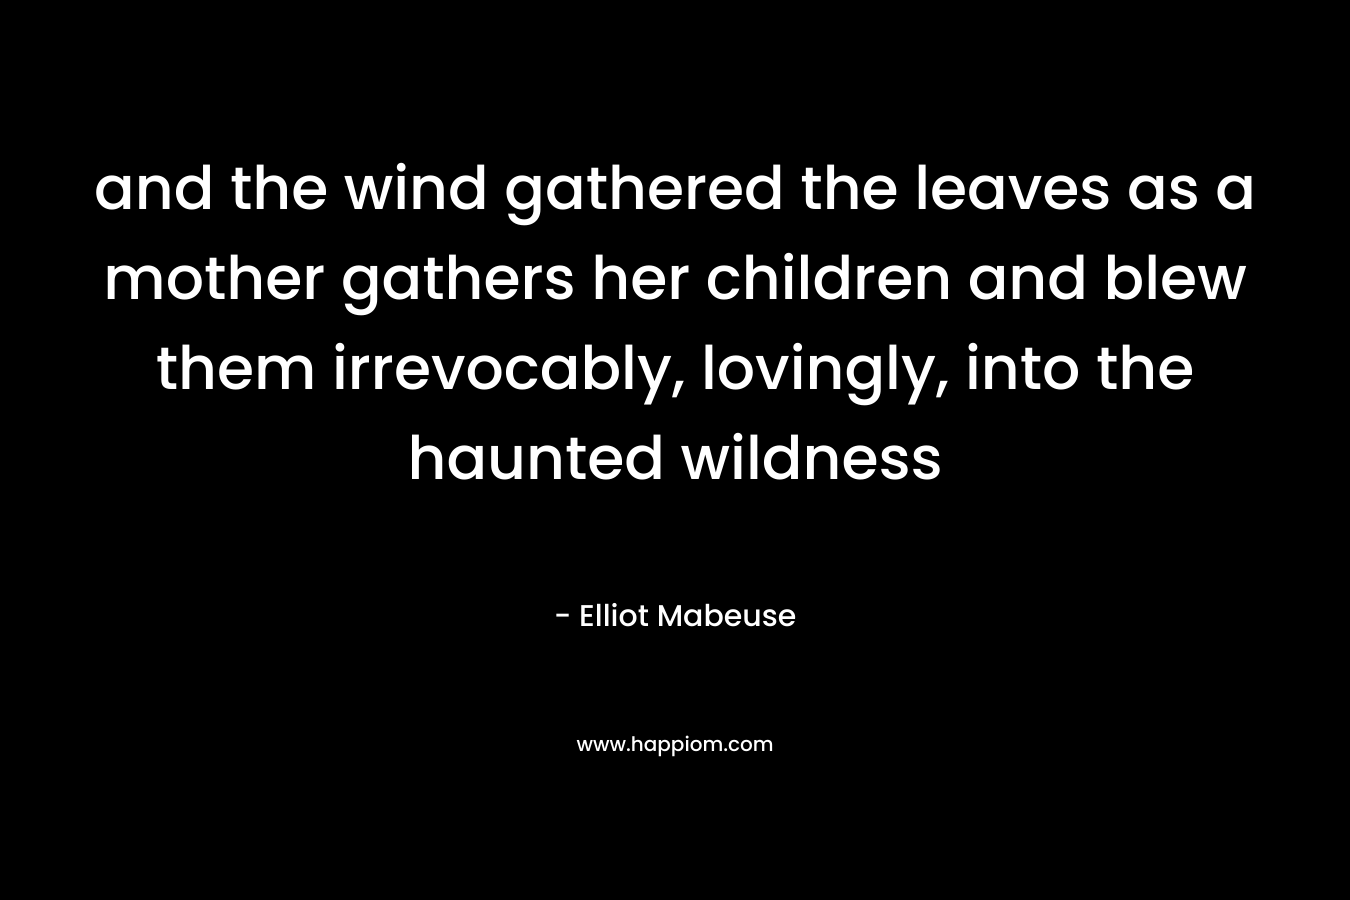 and the wind gathered the leaves as a mother gathers her children and blew them irrevocably, lovingly, into the haunted wildness